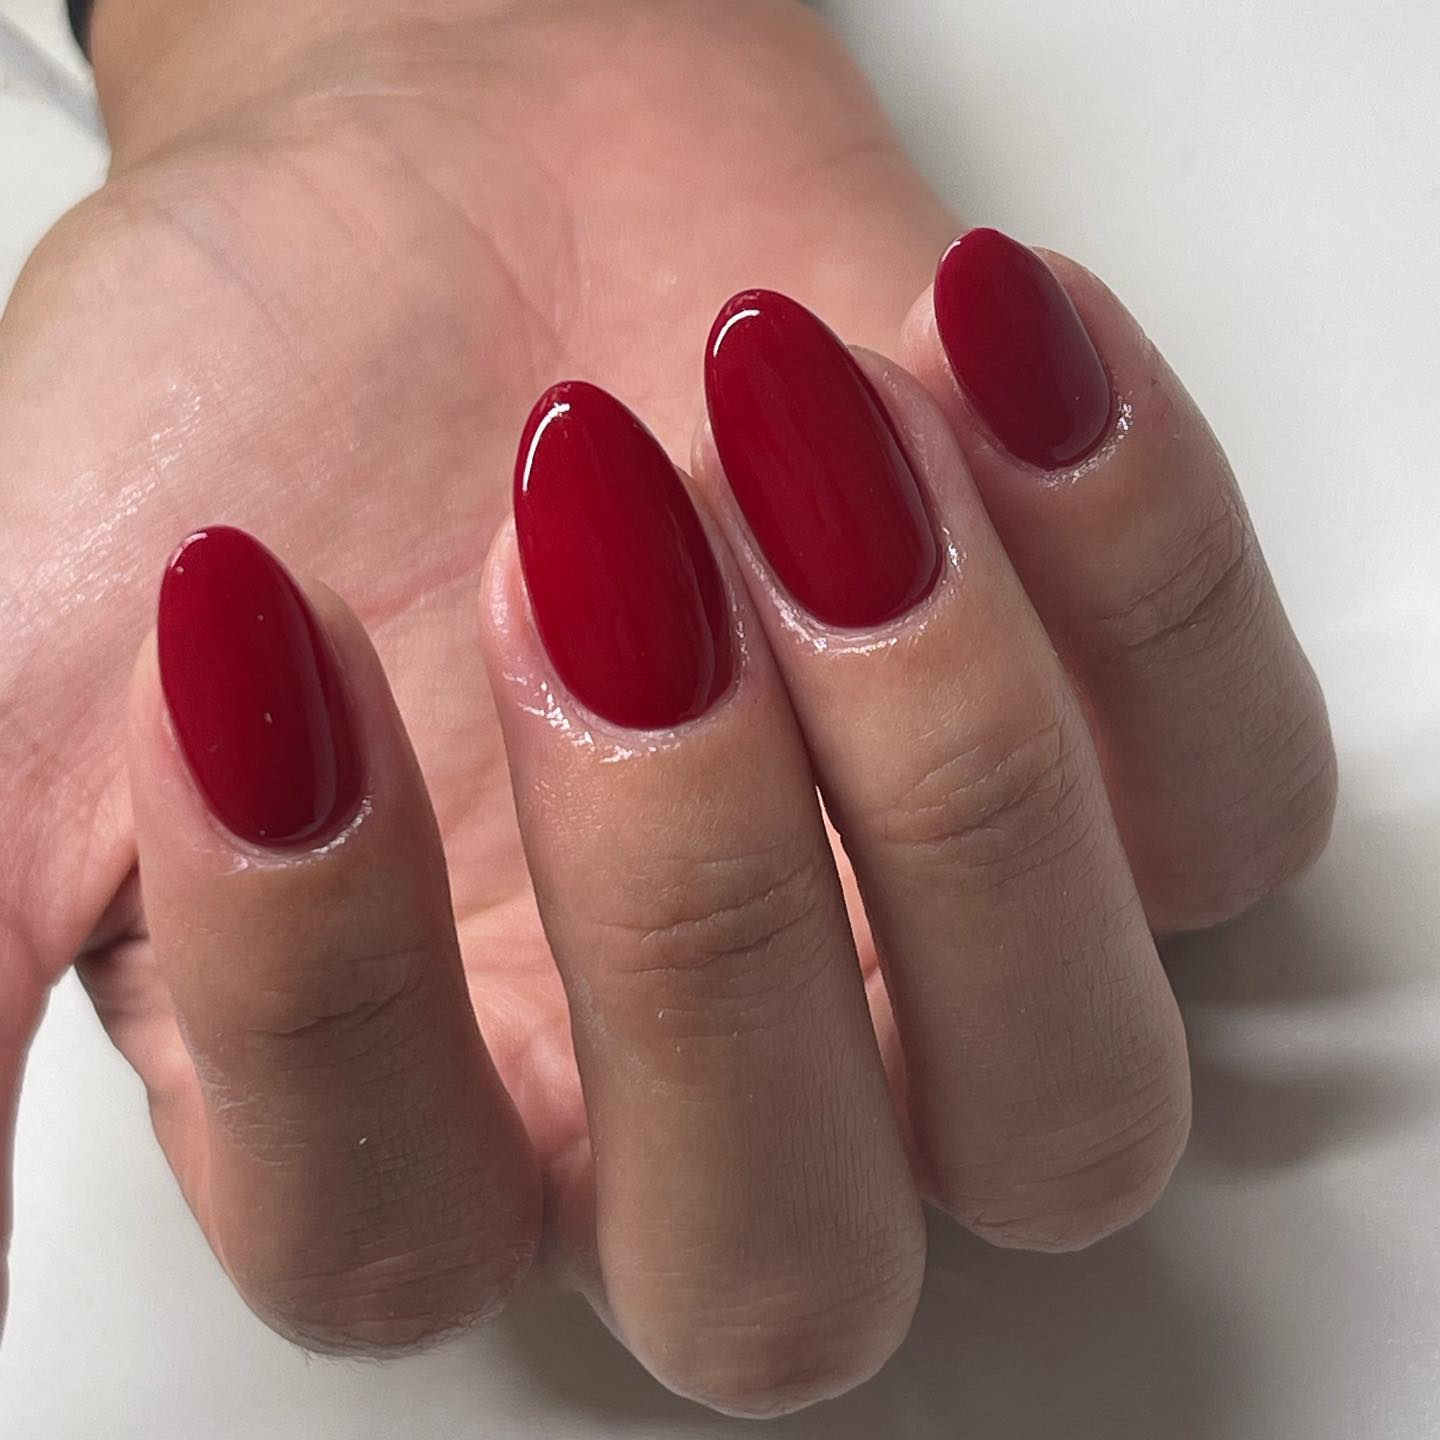 It is sure that there are just a few colors that can look cool on everyone's nails. Here is one of them: Burgundy. If you prefer dark tones of red, you should definitely try this.